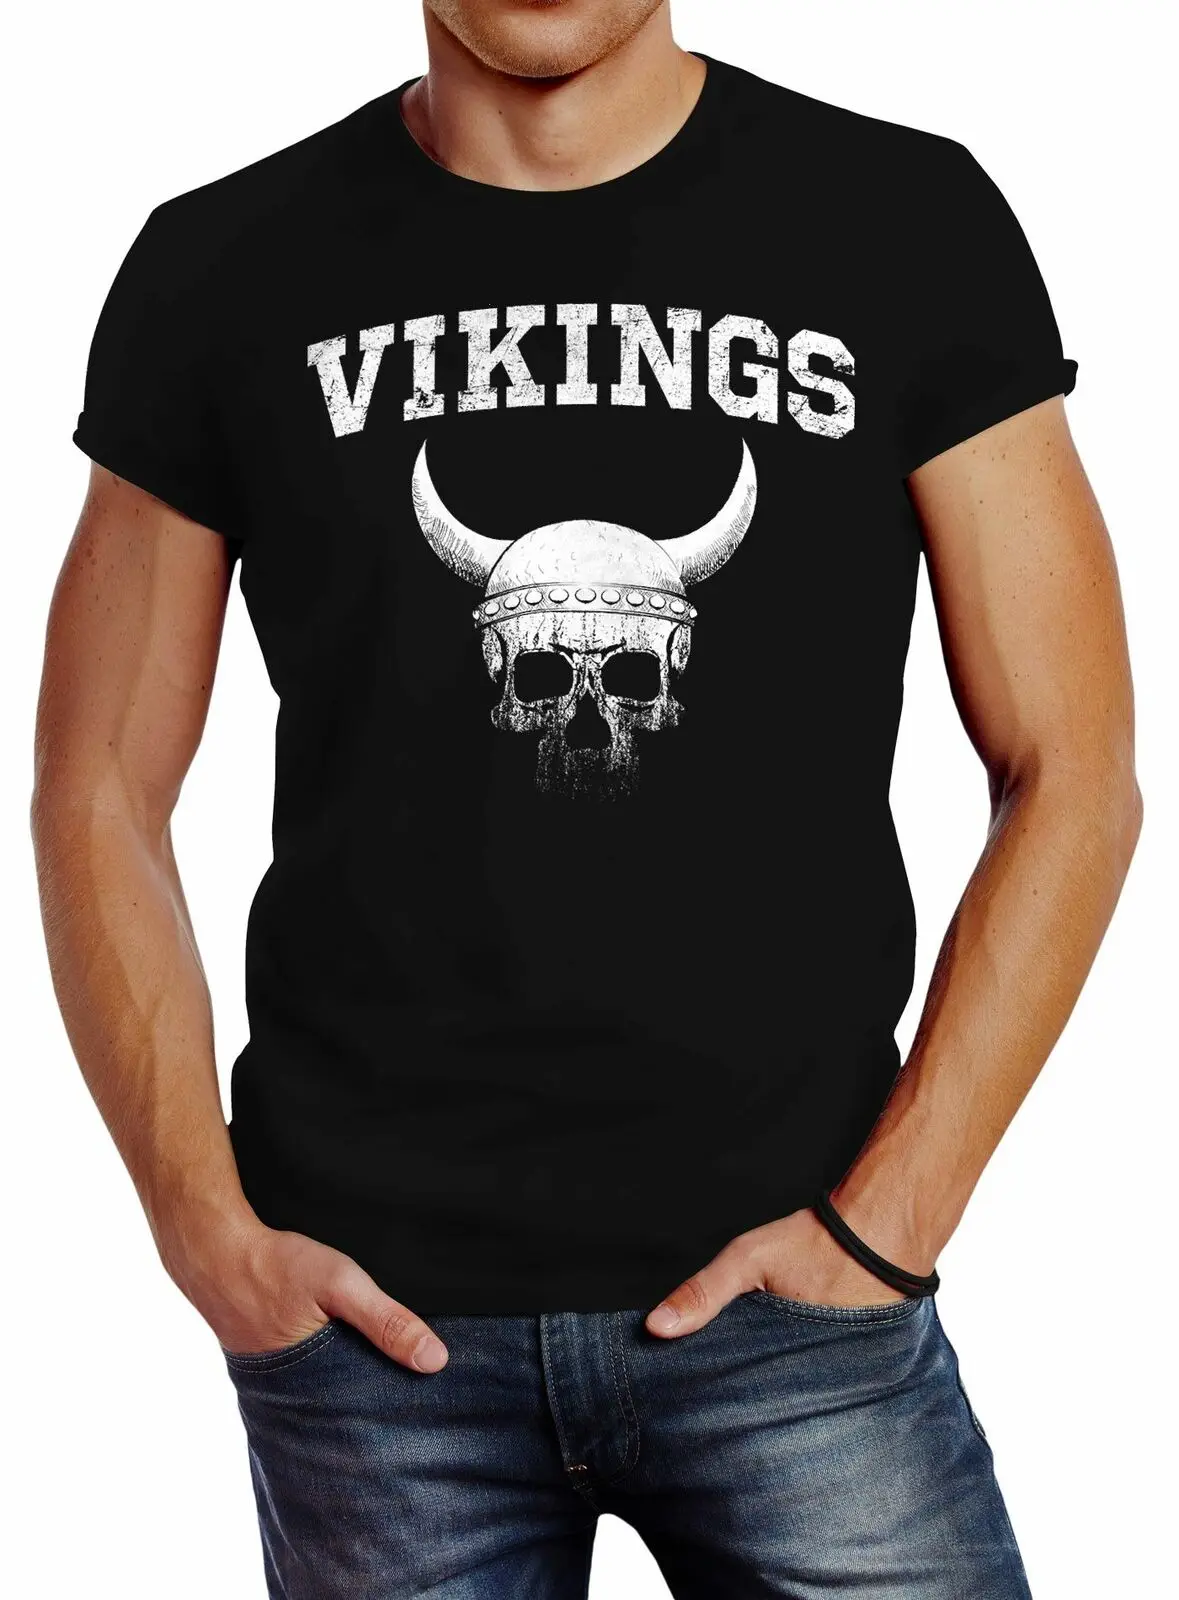 

Wikinger-Helm Skull Totenkopf T-Shirt Fashion Streetstyle Men's 100% Cotton Casual T-shirts Loose Top Size S-3XL